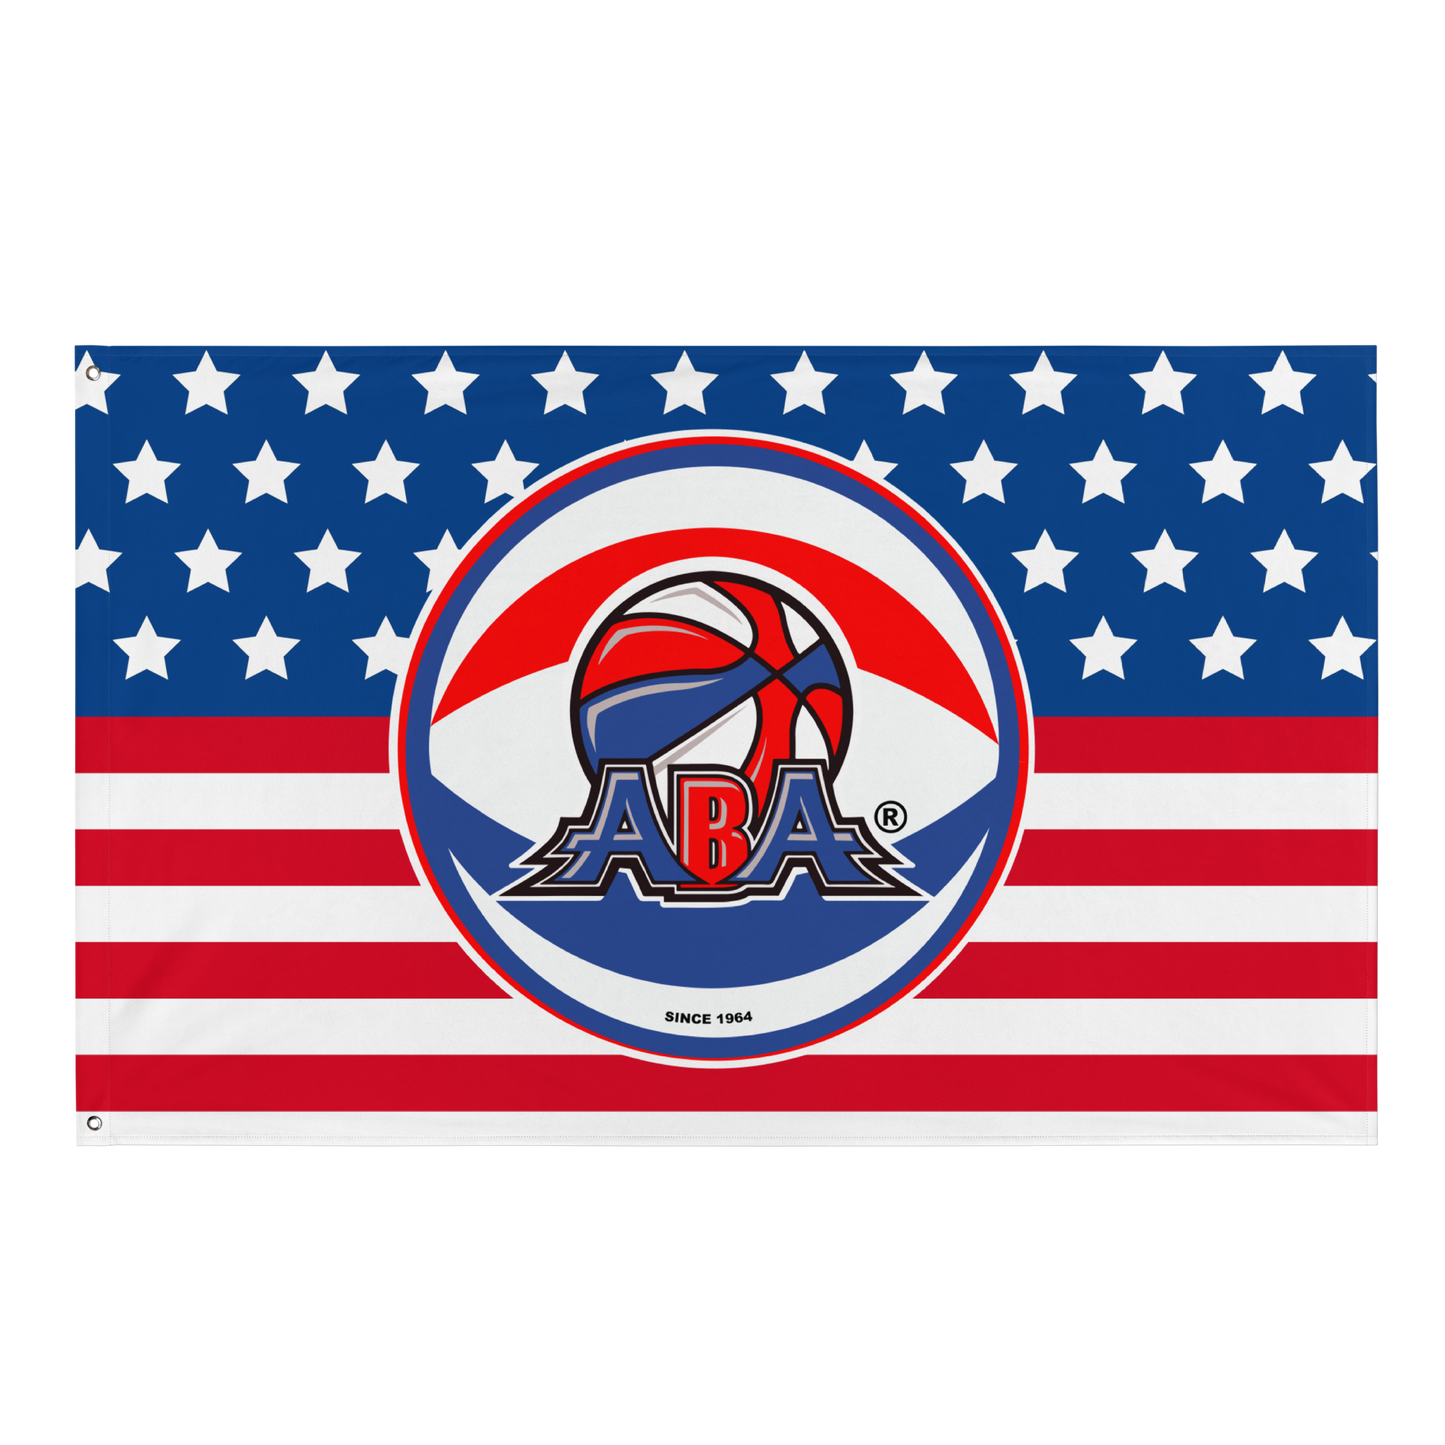 "United in Basketball: Introducing the ABA USA Fan Flag!